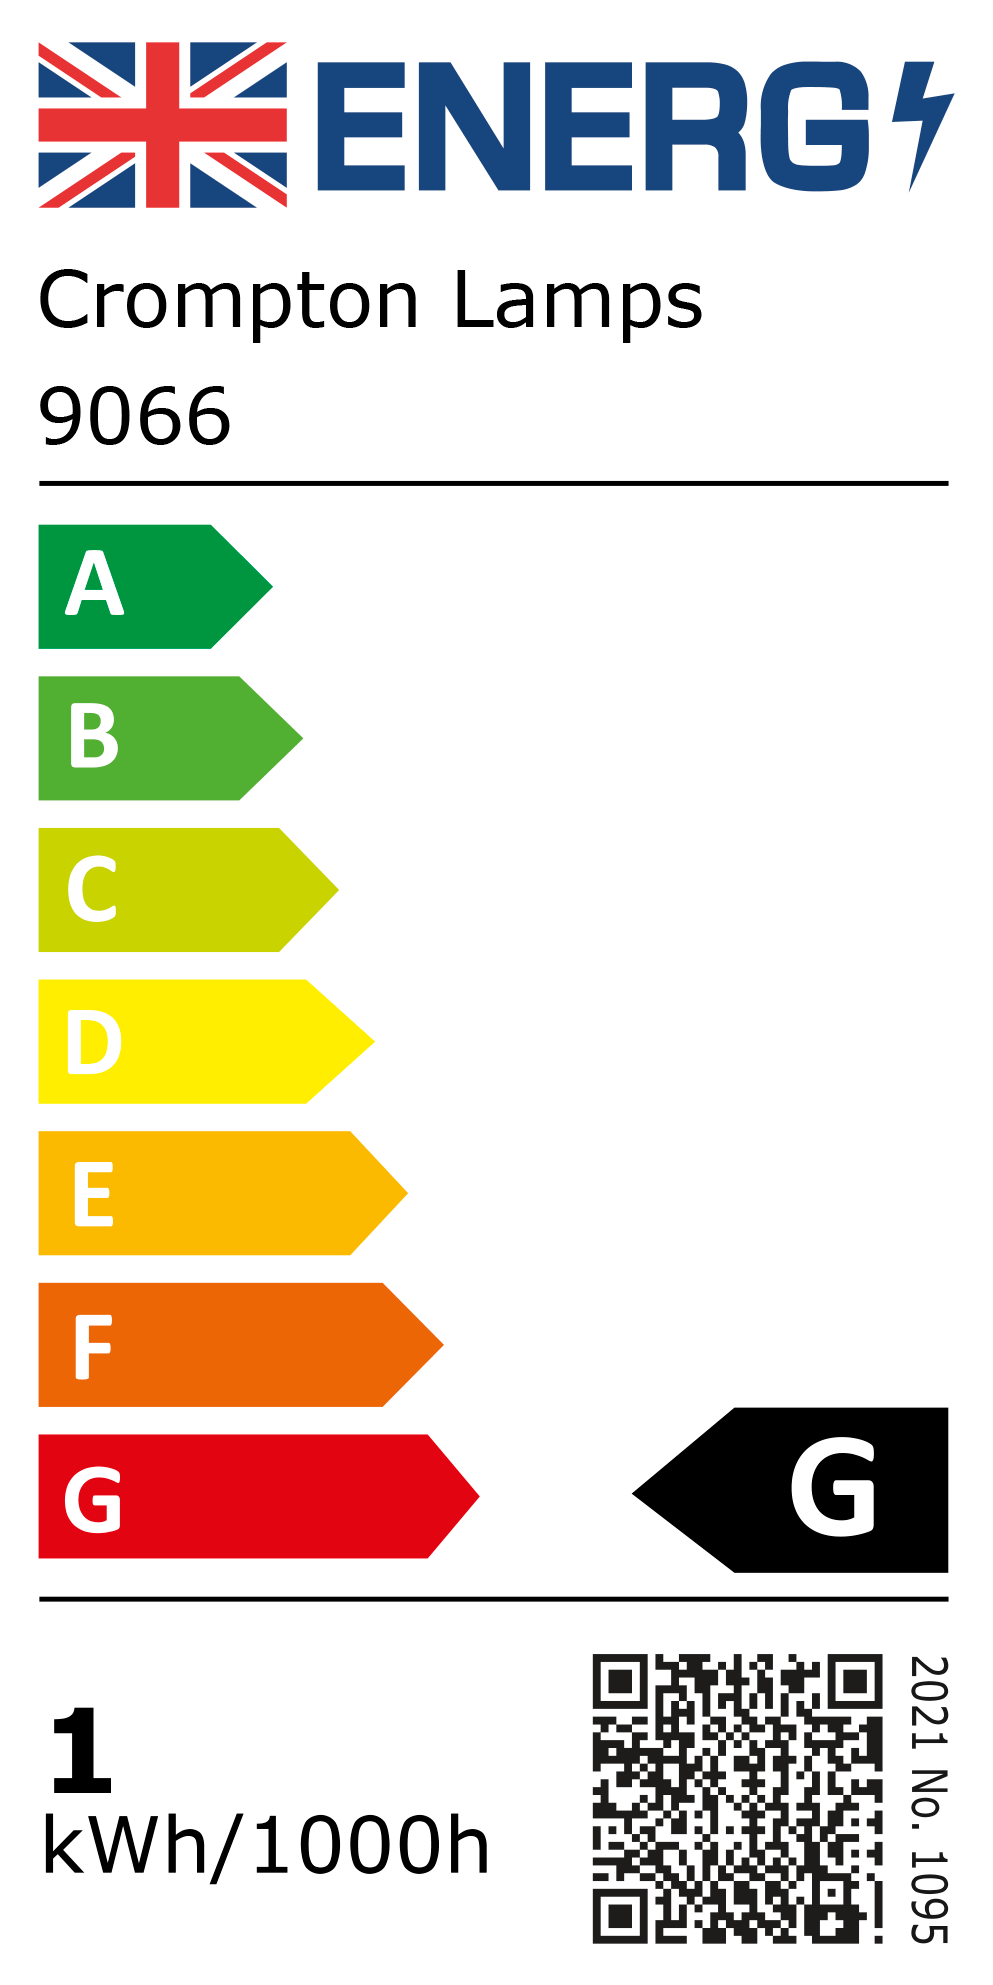 New 2021 Energy Rating Label: Stock Code 9066